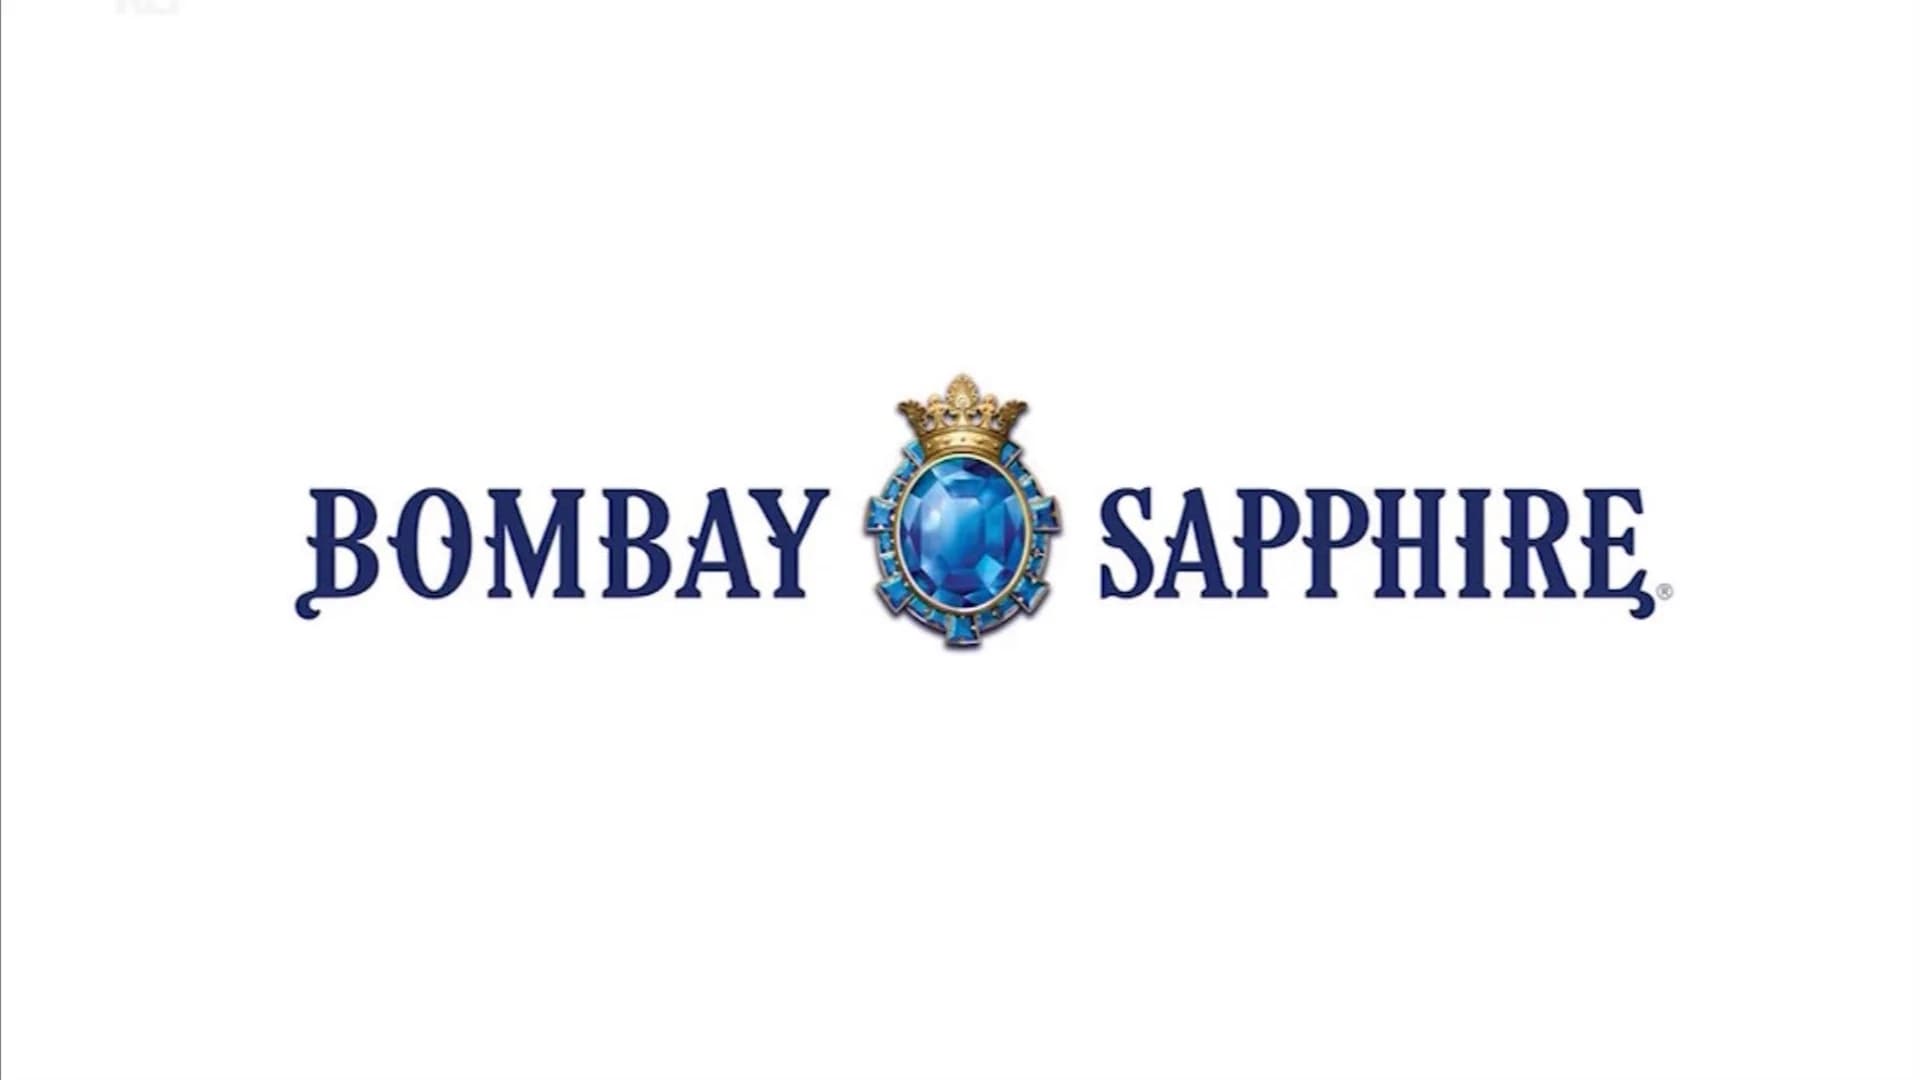 Bombay Sapphire Gin recalled due to “too much” alcohol